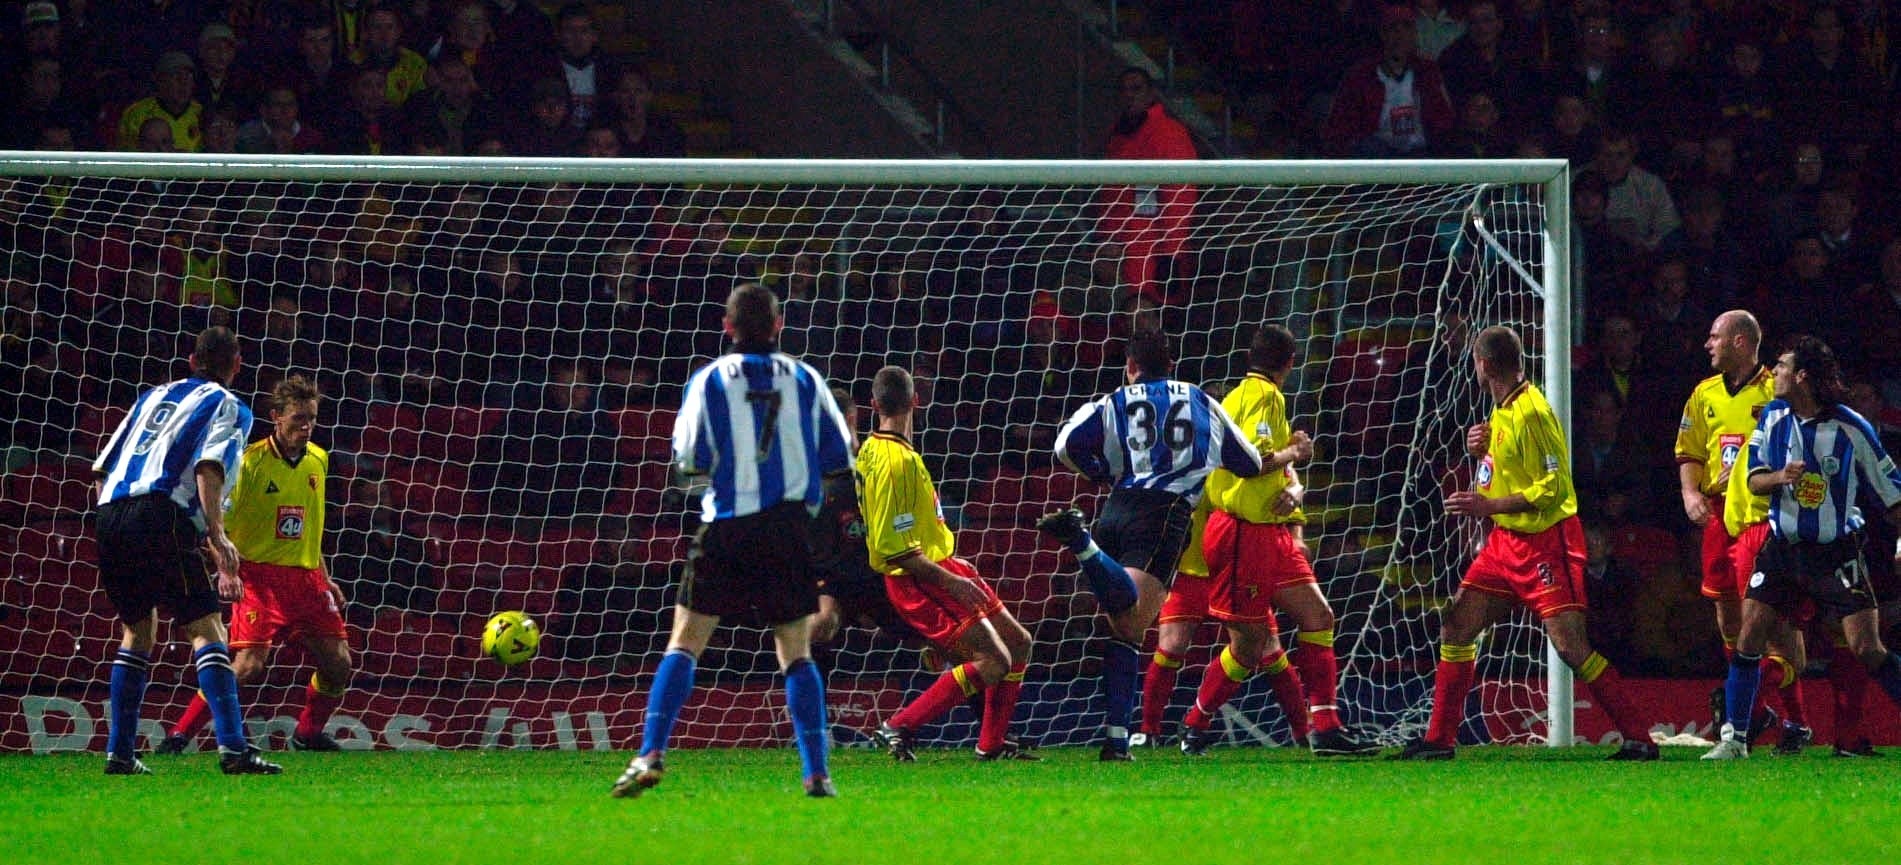 Wrongly recorded Sheffield Wednesday goal against Watford